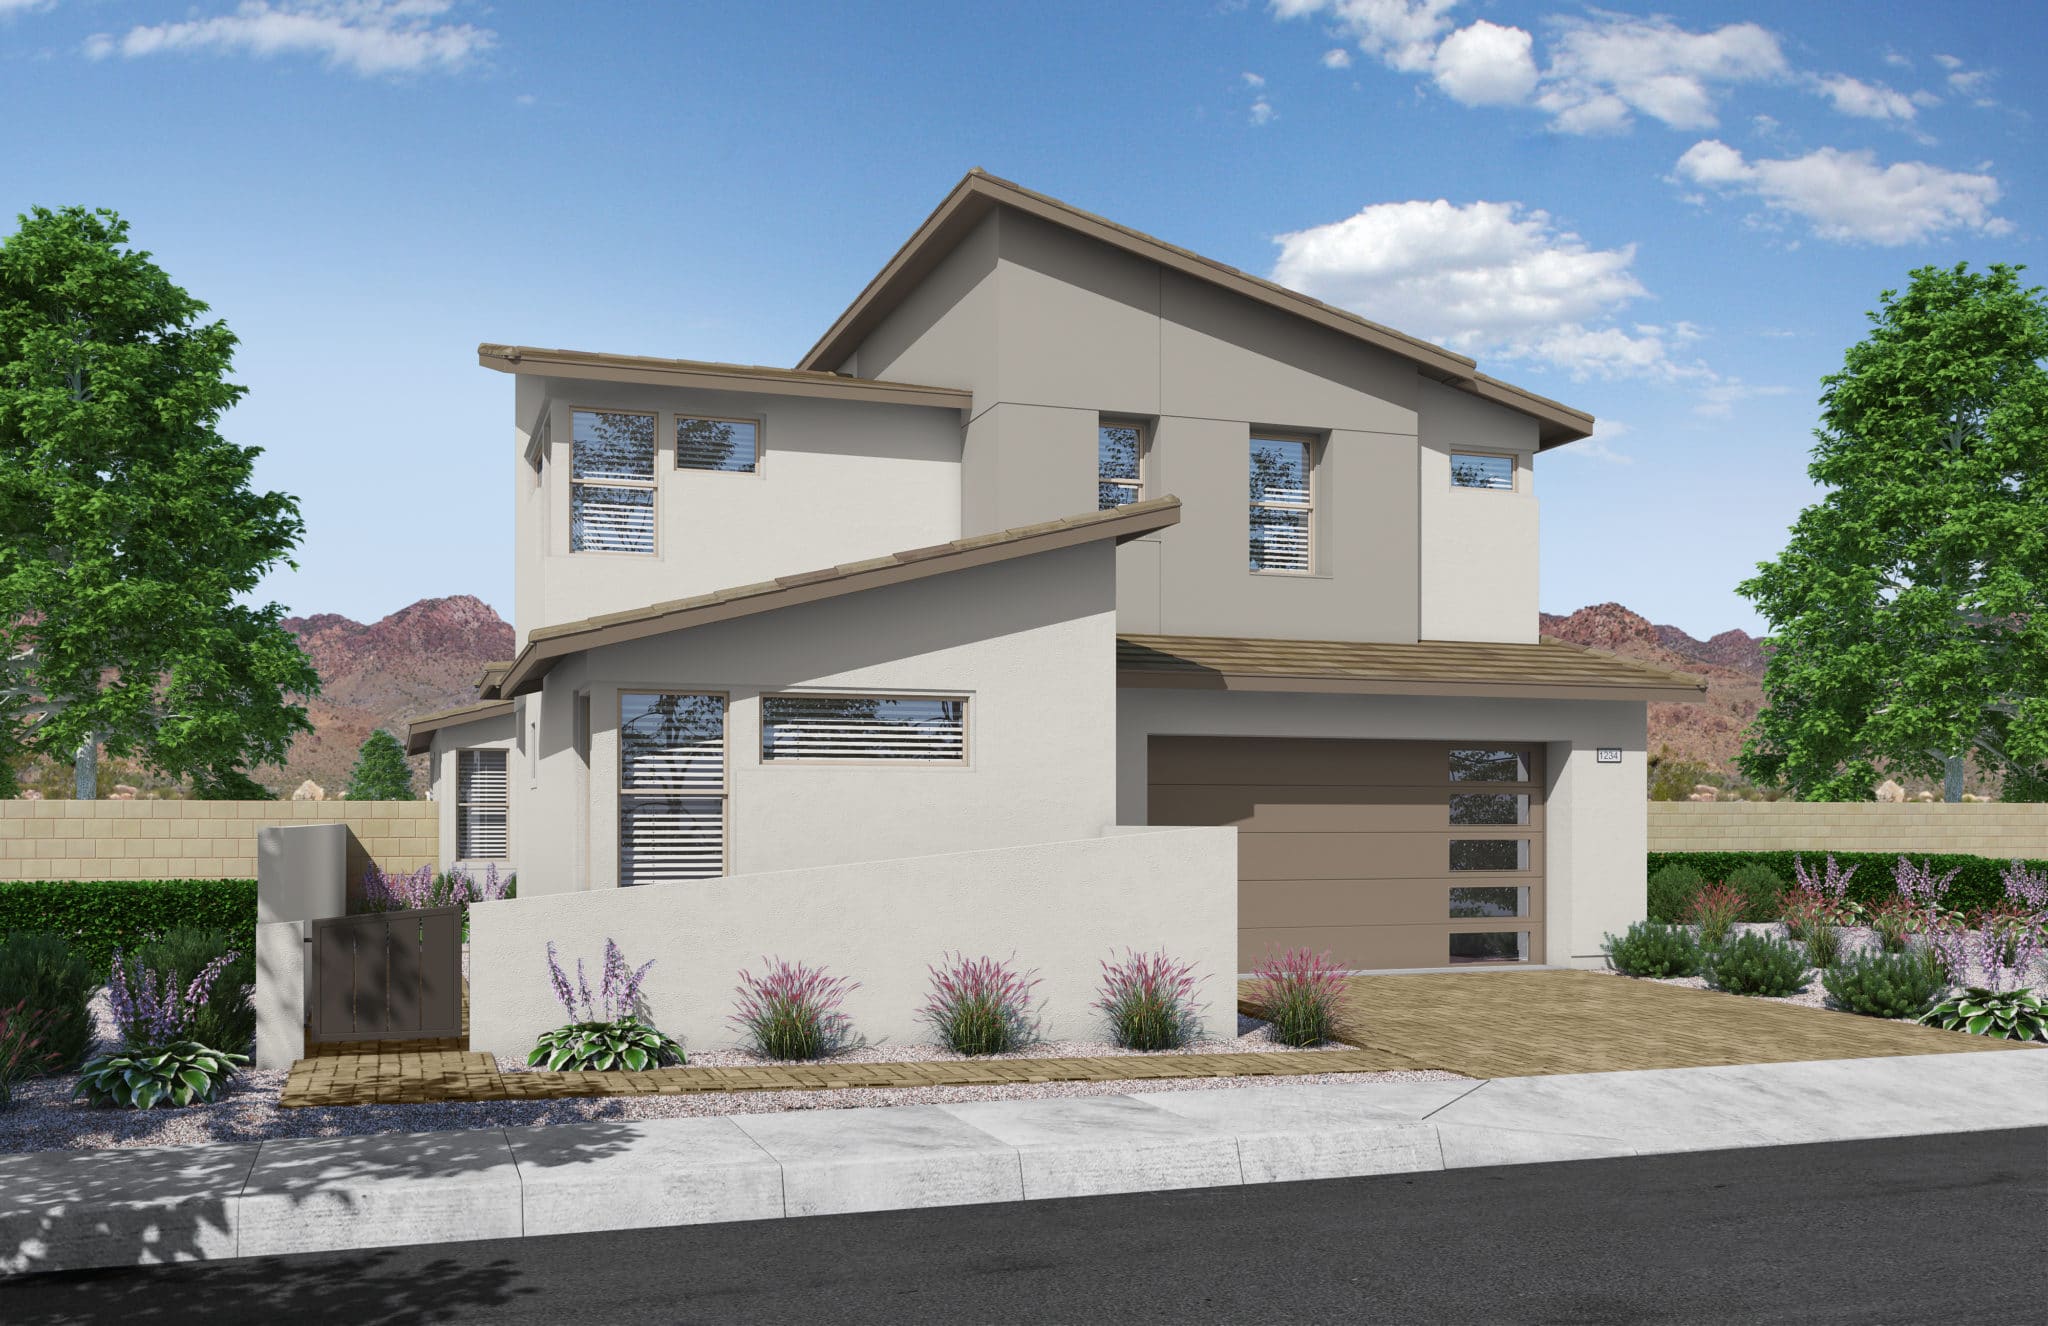 Front Elevation C of Plan 2 of Kings Canyon by Tri Pointe Homes